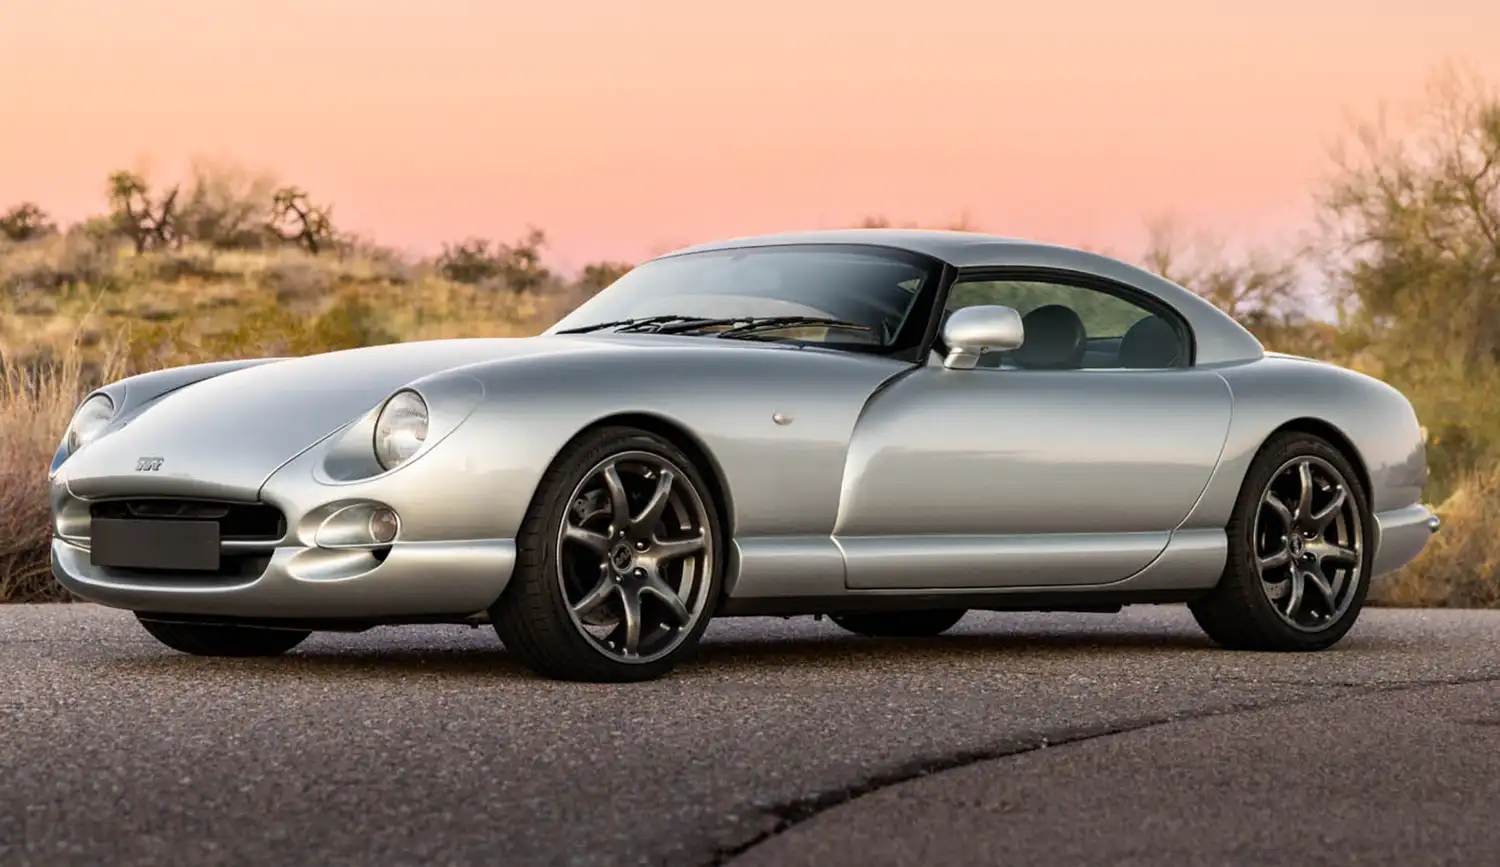 TVR Garage Reintroduces Classic British Sports Cars to the USA